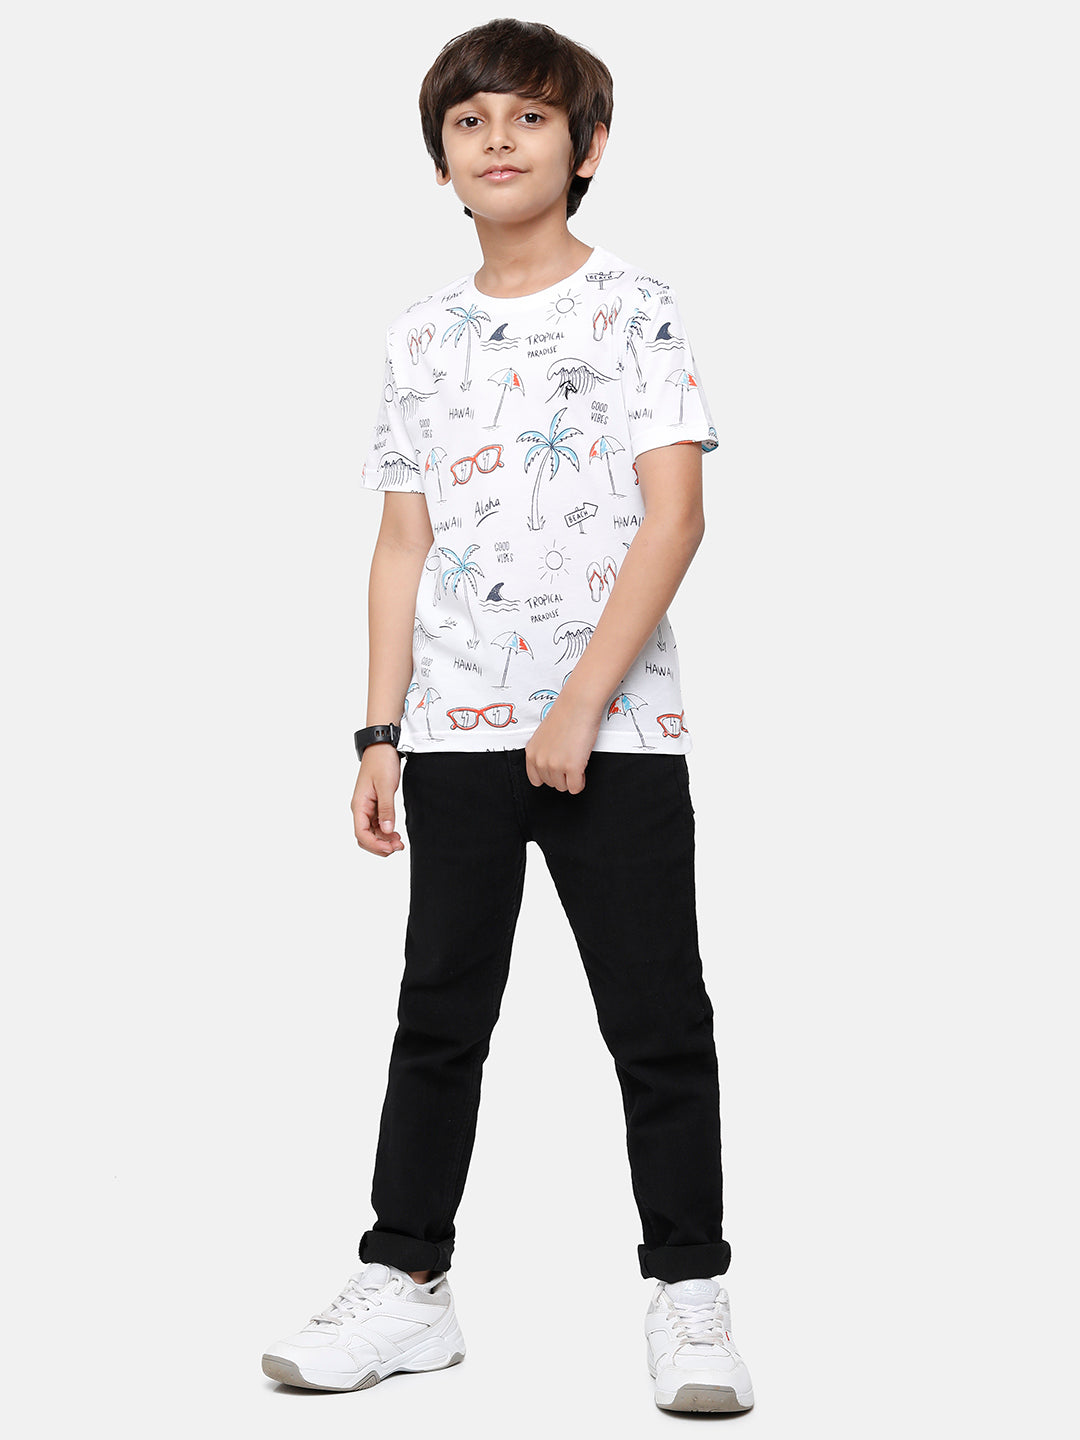 CP Boys 100% Cotton Printed Slim Fit Round Neck T-Shirt T-shirt Classic Polo 